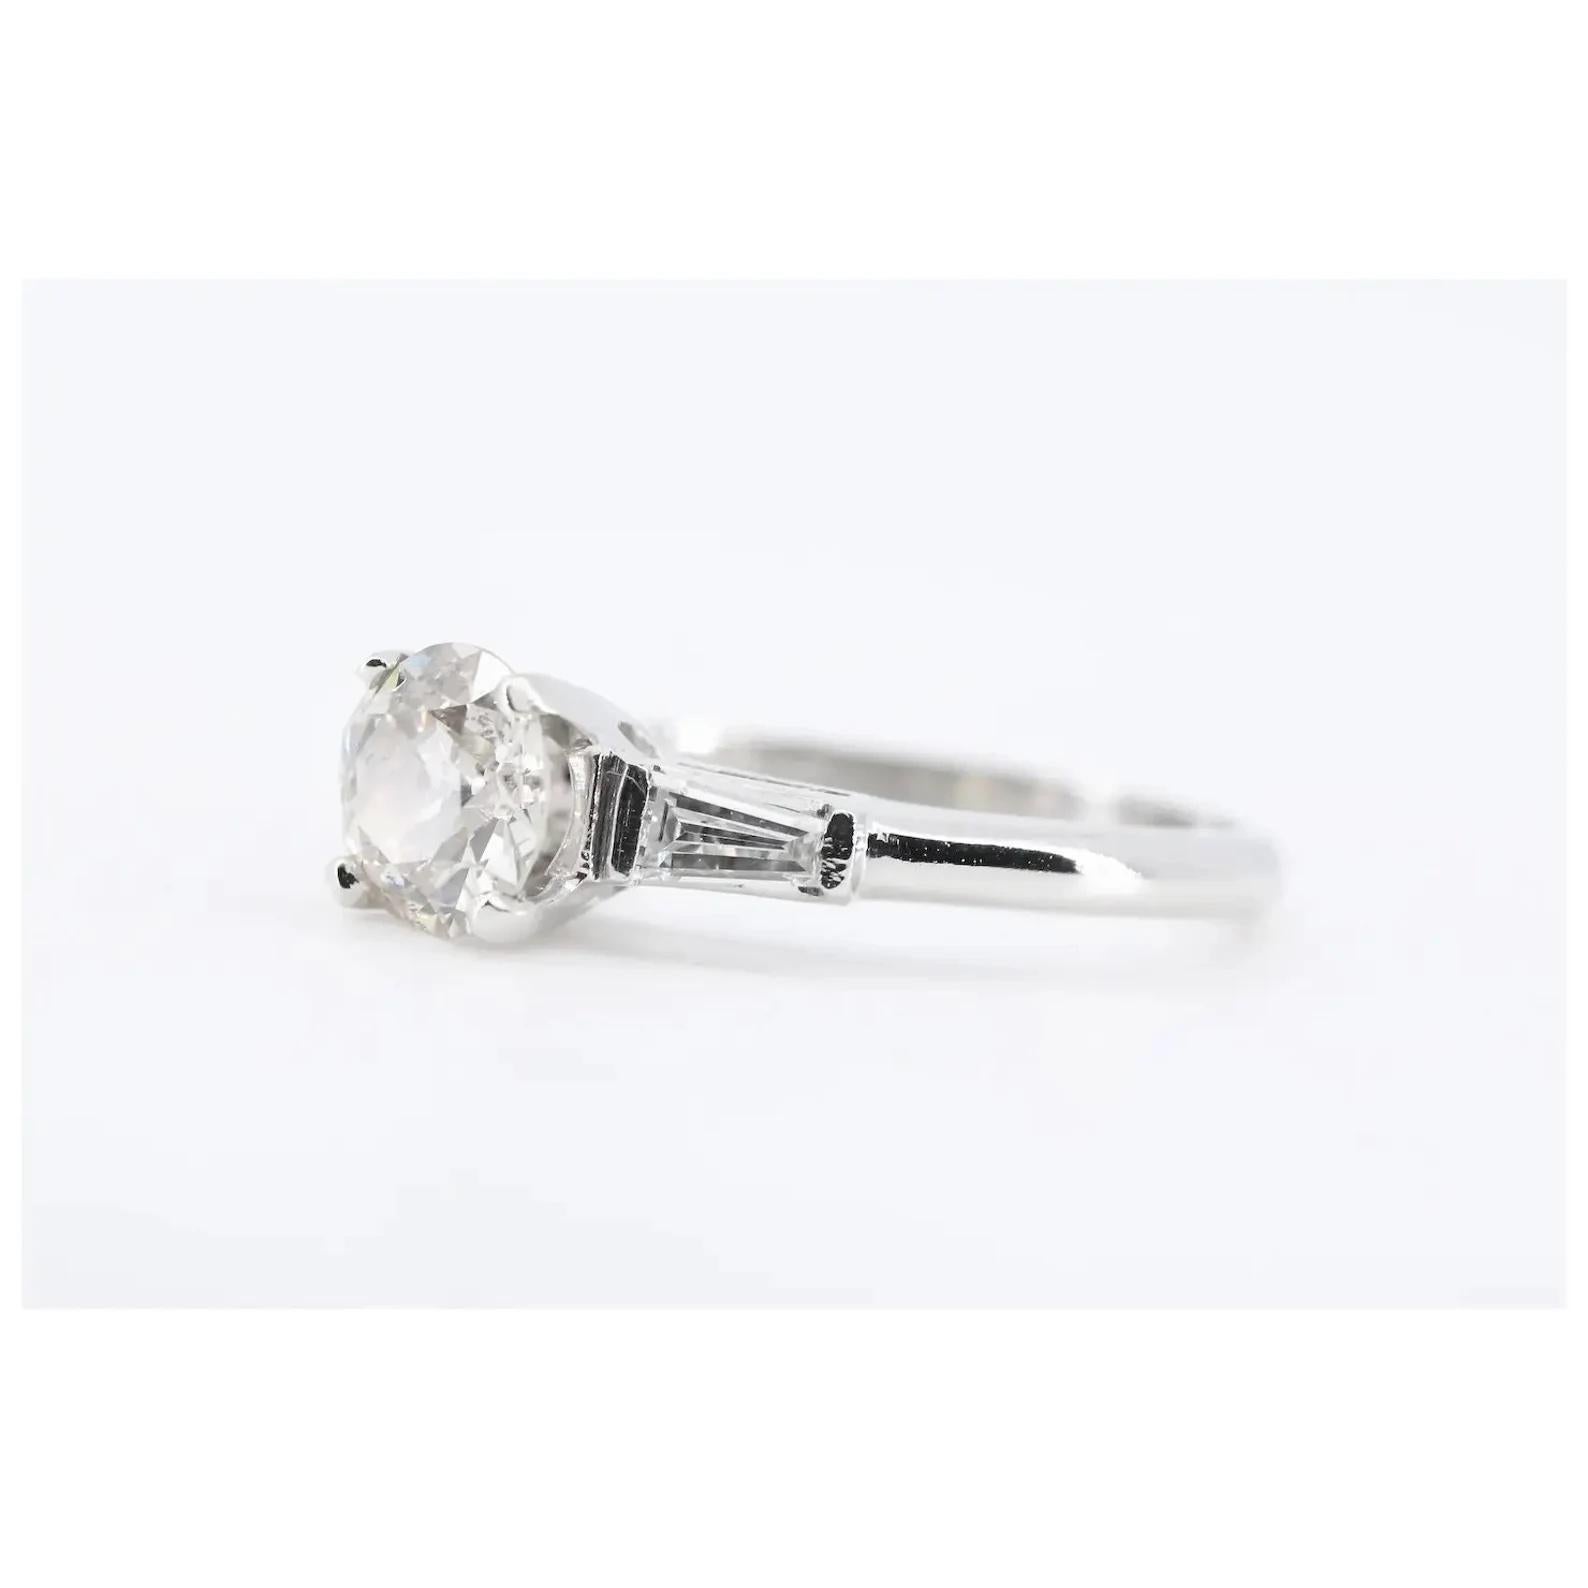 A mid century vintage platinum, and diamond engagement ring.

Centered by a 0.83 carat old European cut diamond of J color and SI1 clarity.

Framing the center diamond are two 0.20ctw tapered baguette cut diamonds of G color, VS clarity.

Mounted in